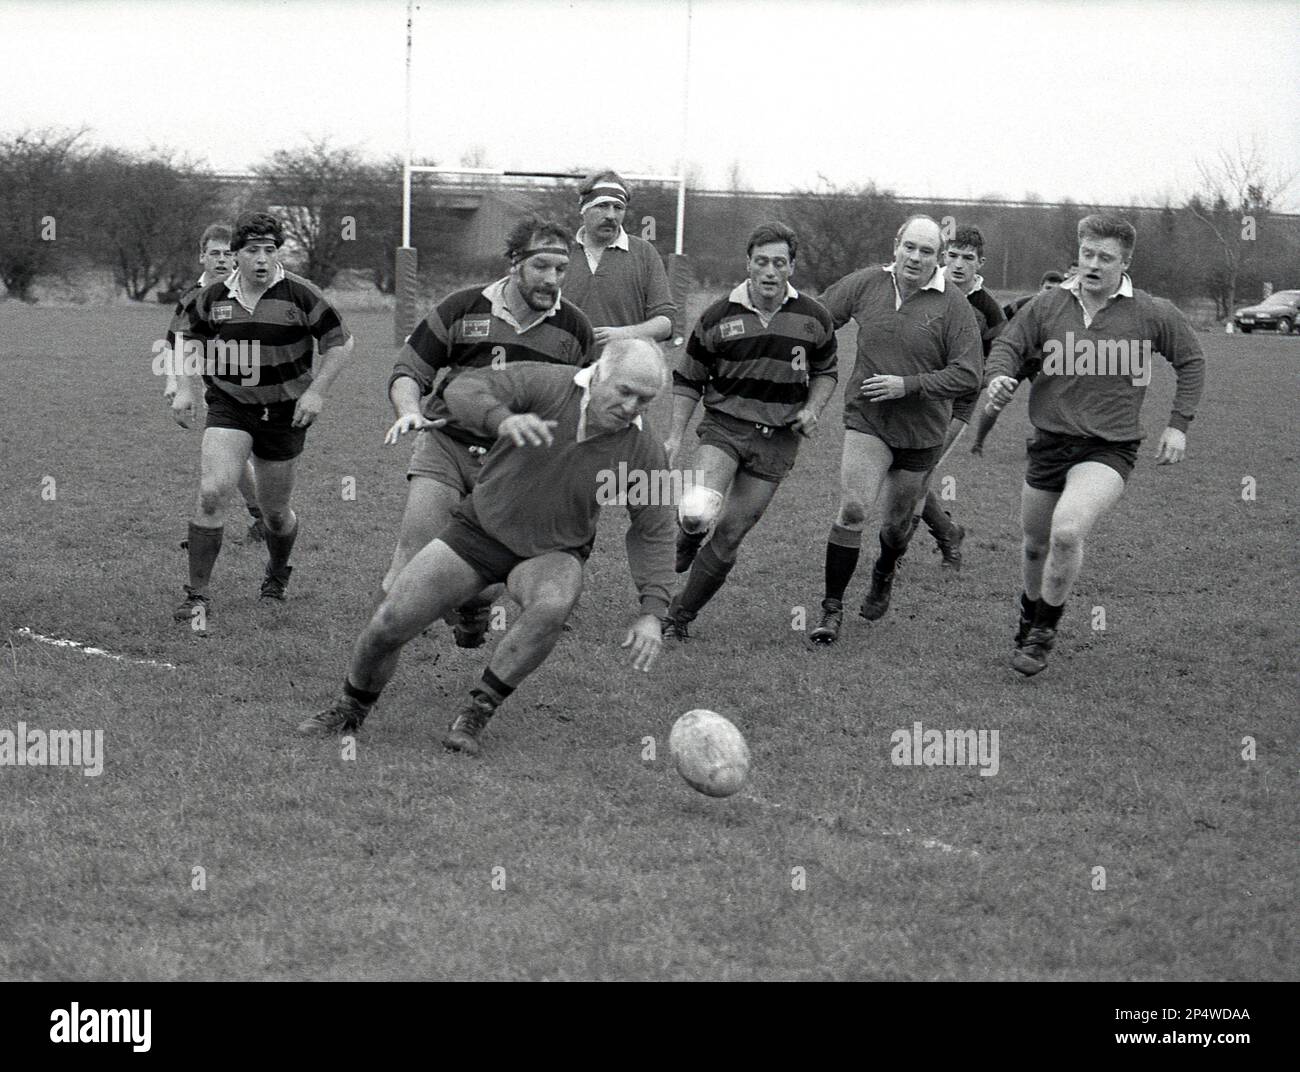 1980s, amateur rugby union match, forwards competing for loose ball, Sleaford, Lincs, England, UK. Stock Photo